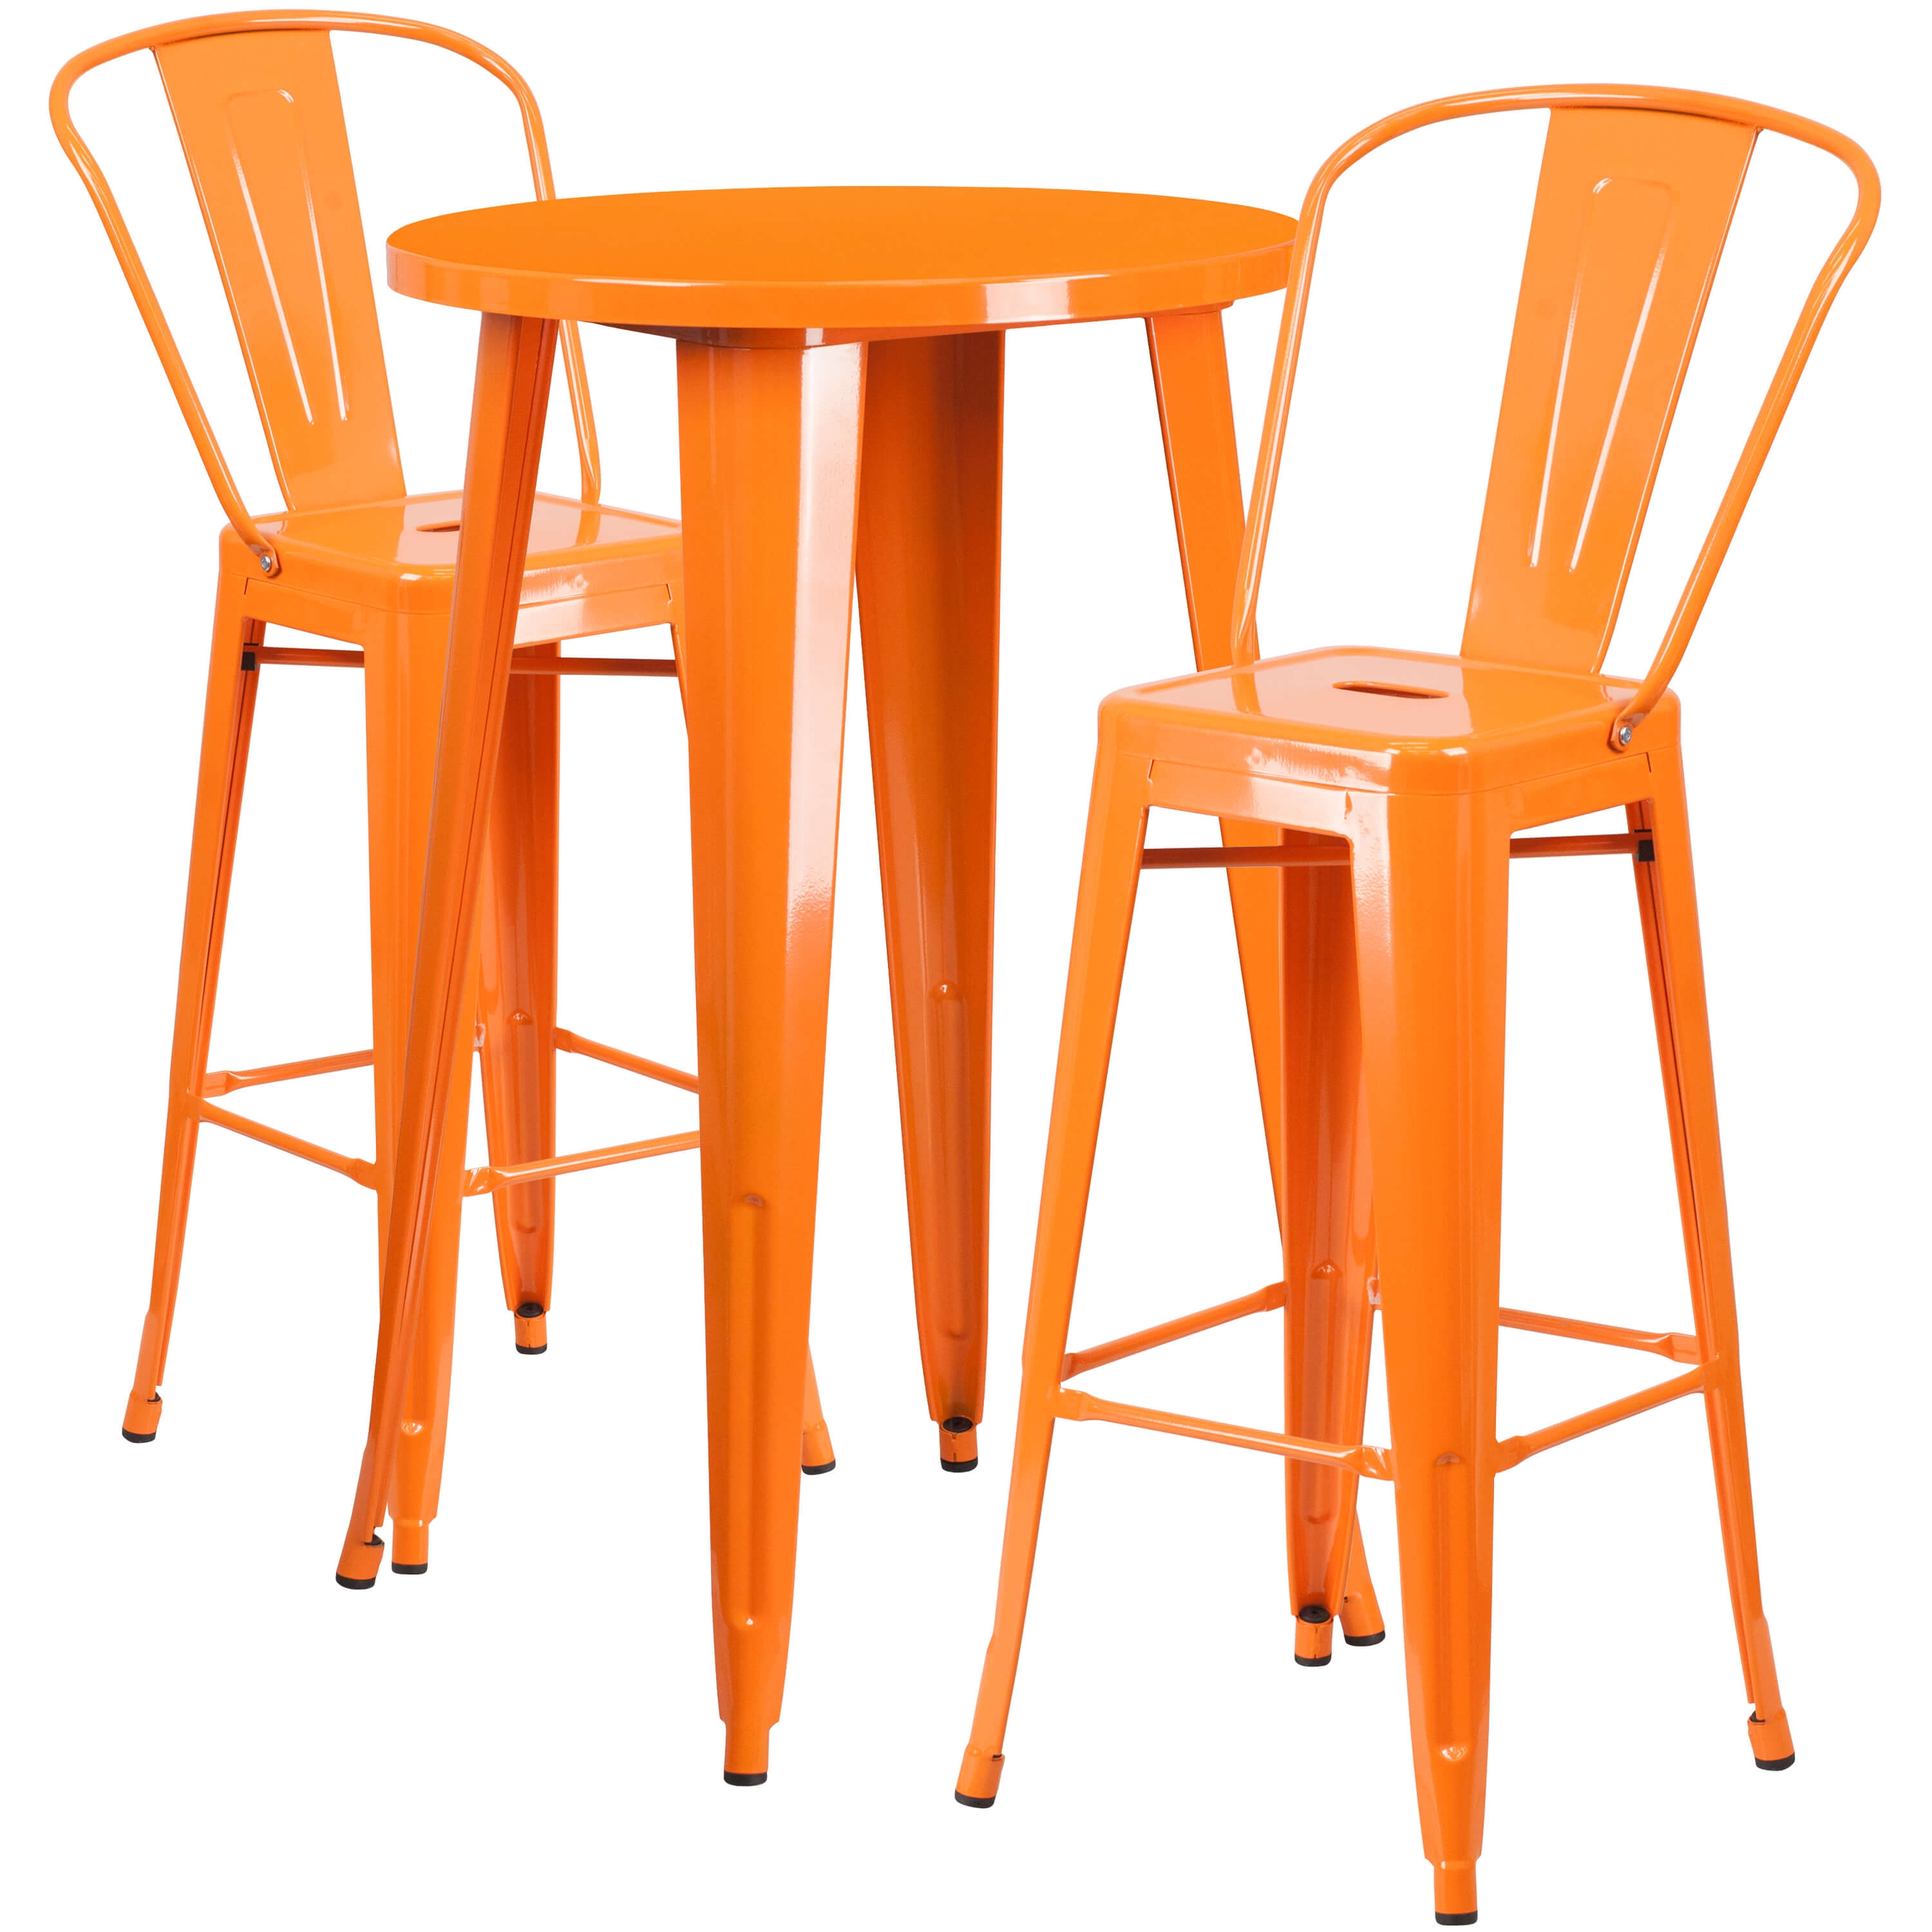 Cafe tables and chairs bar height bistro patio set